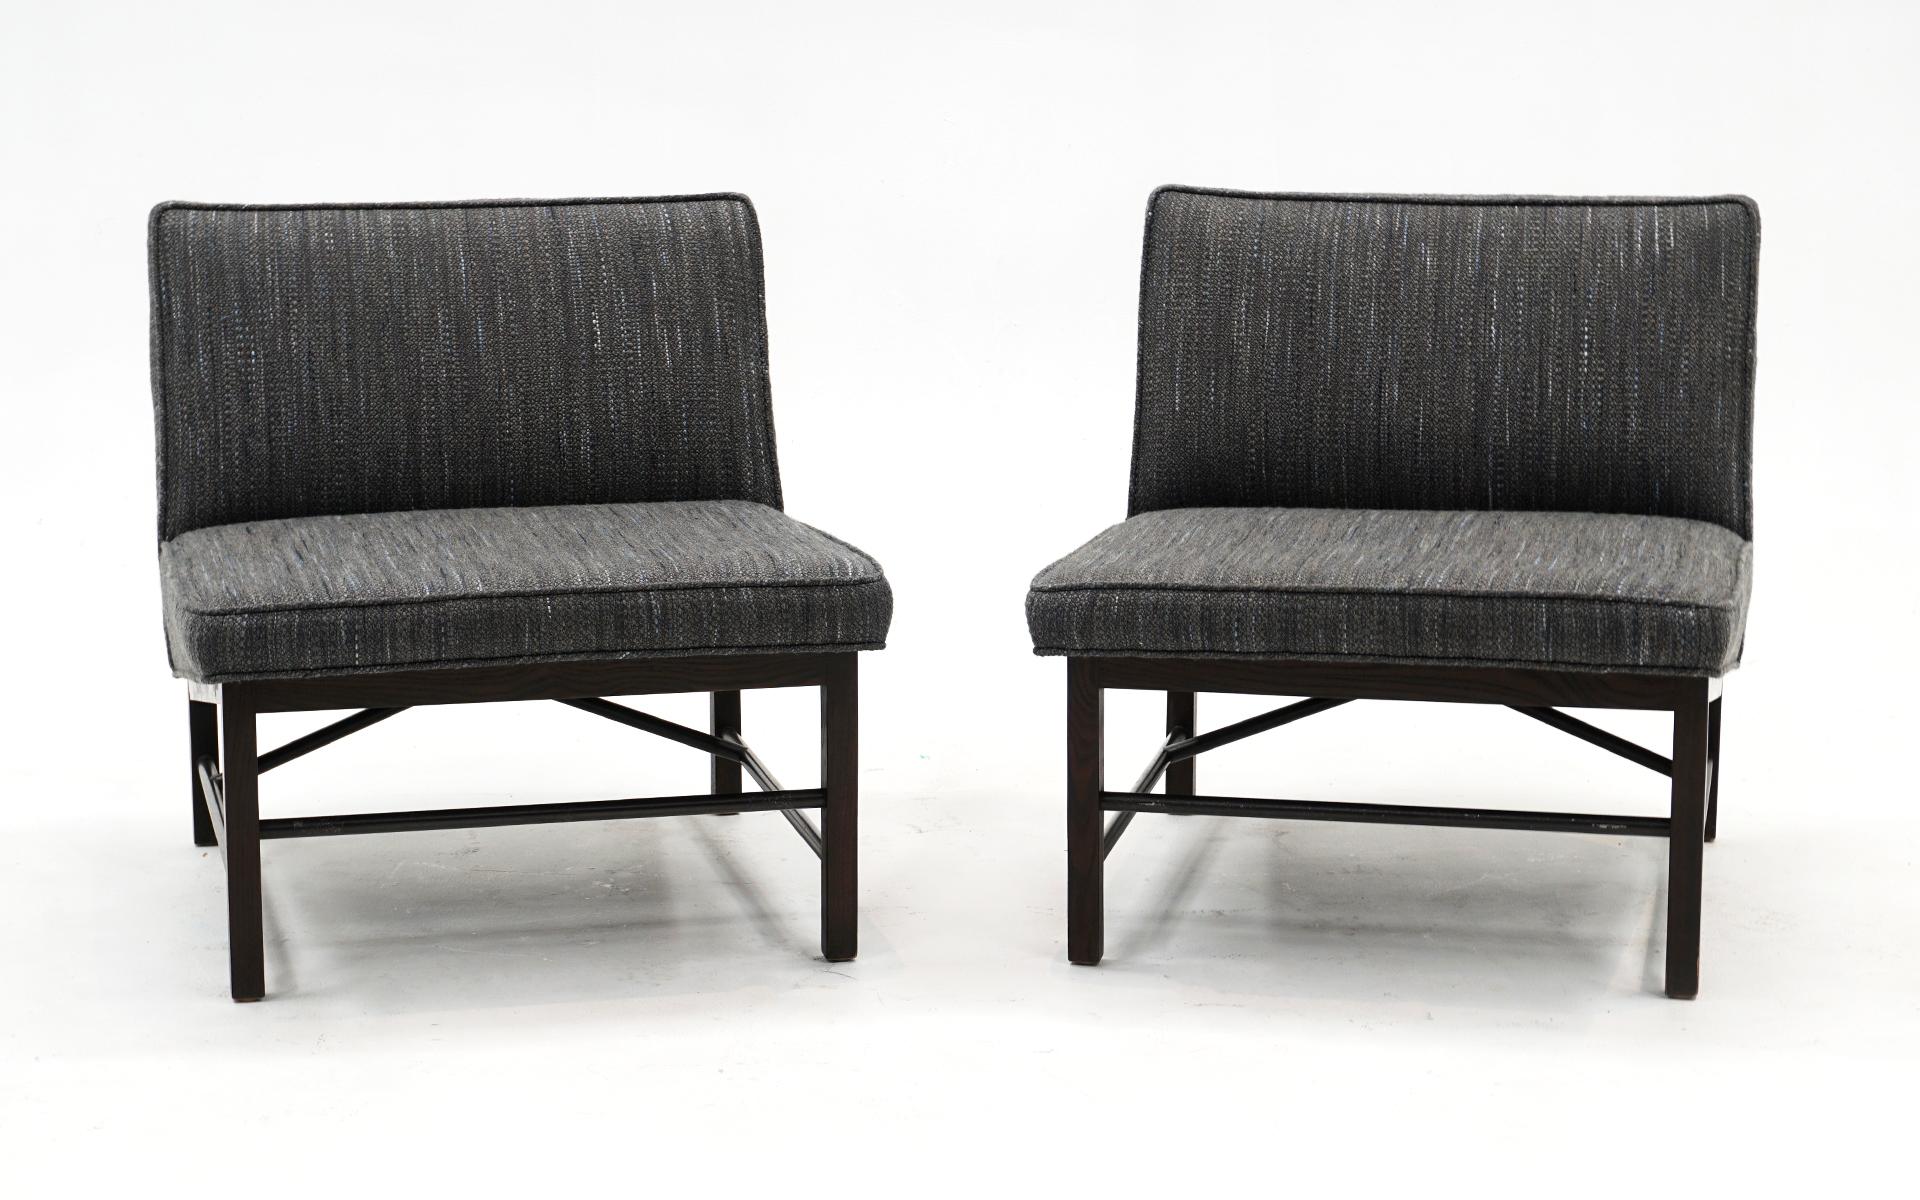 American Pair Slipper Chairs by Edward Wormley for Dunbar, New Charcoal Gray Upholstery For Sale